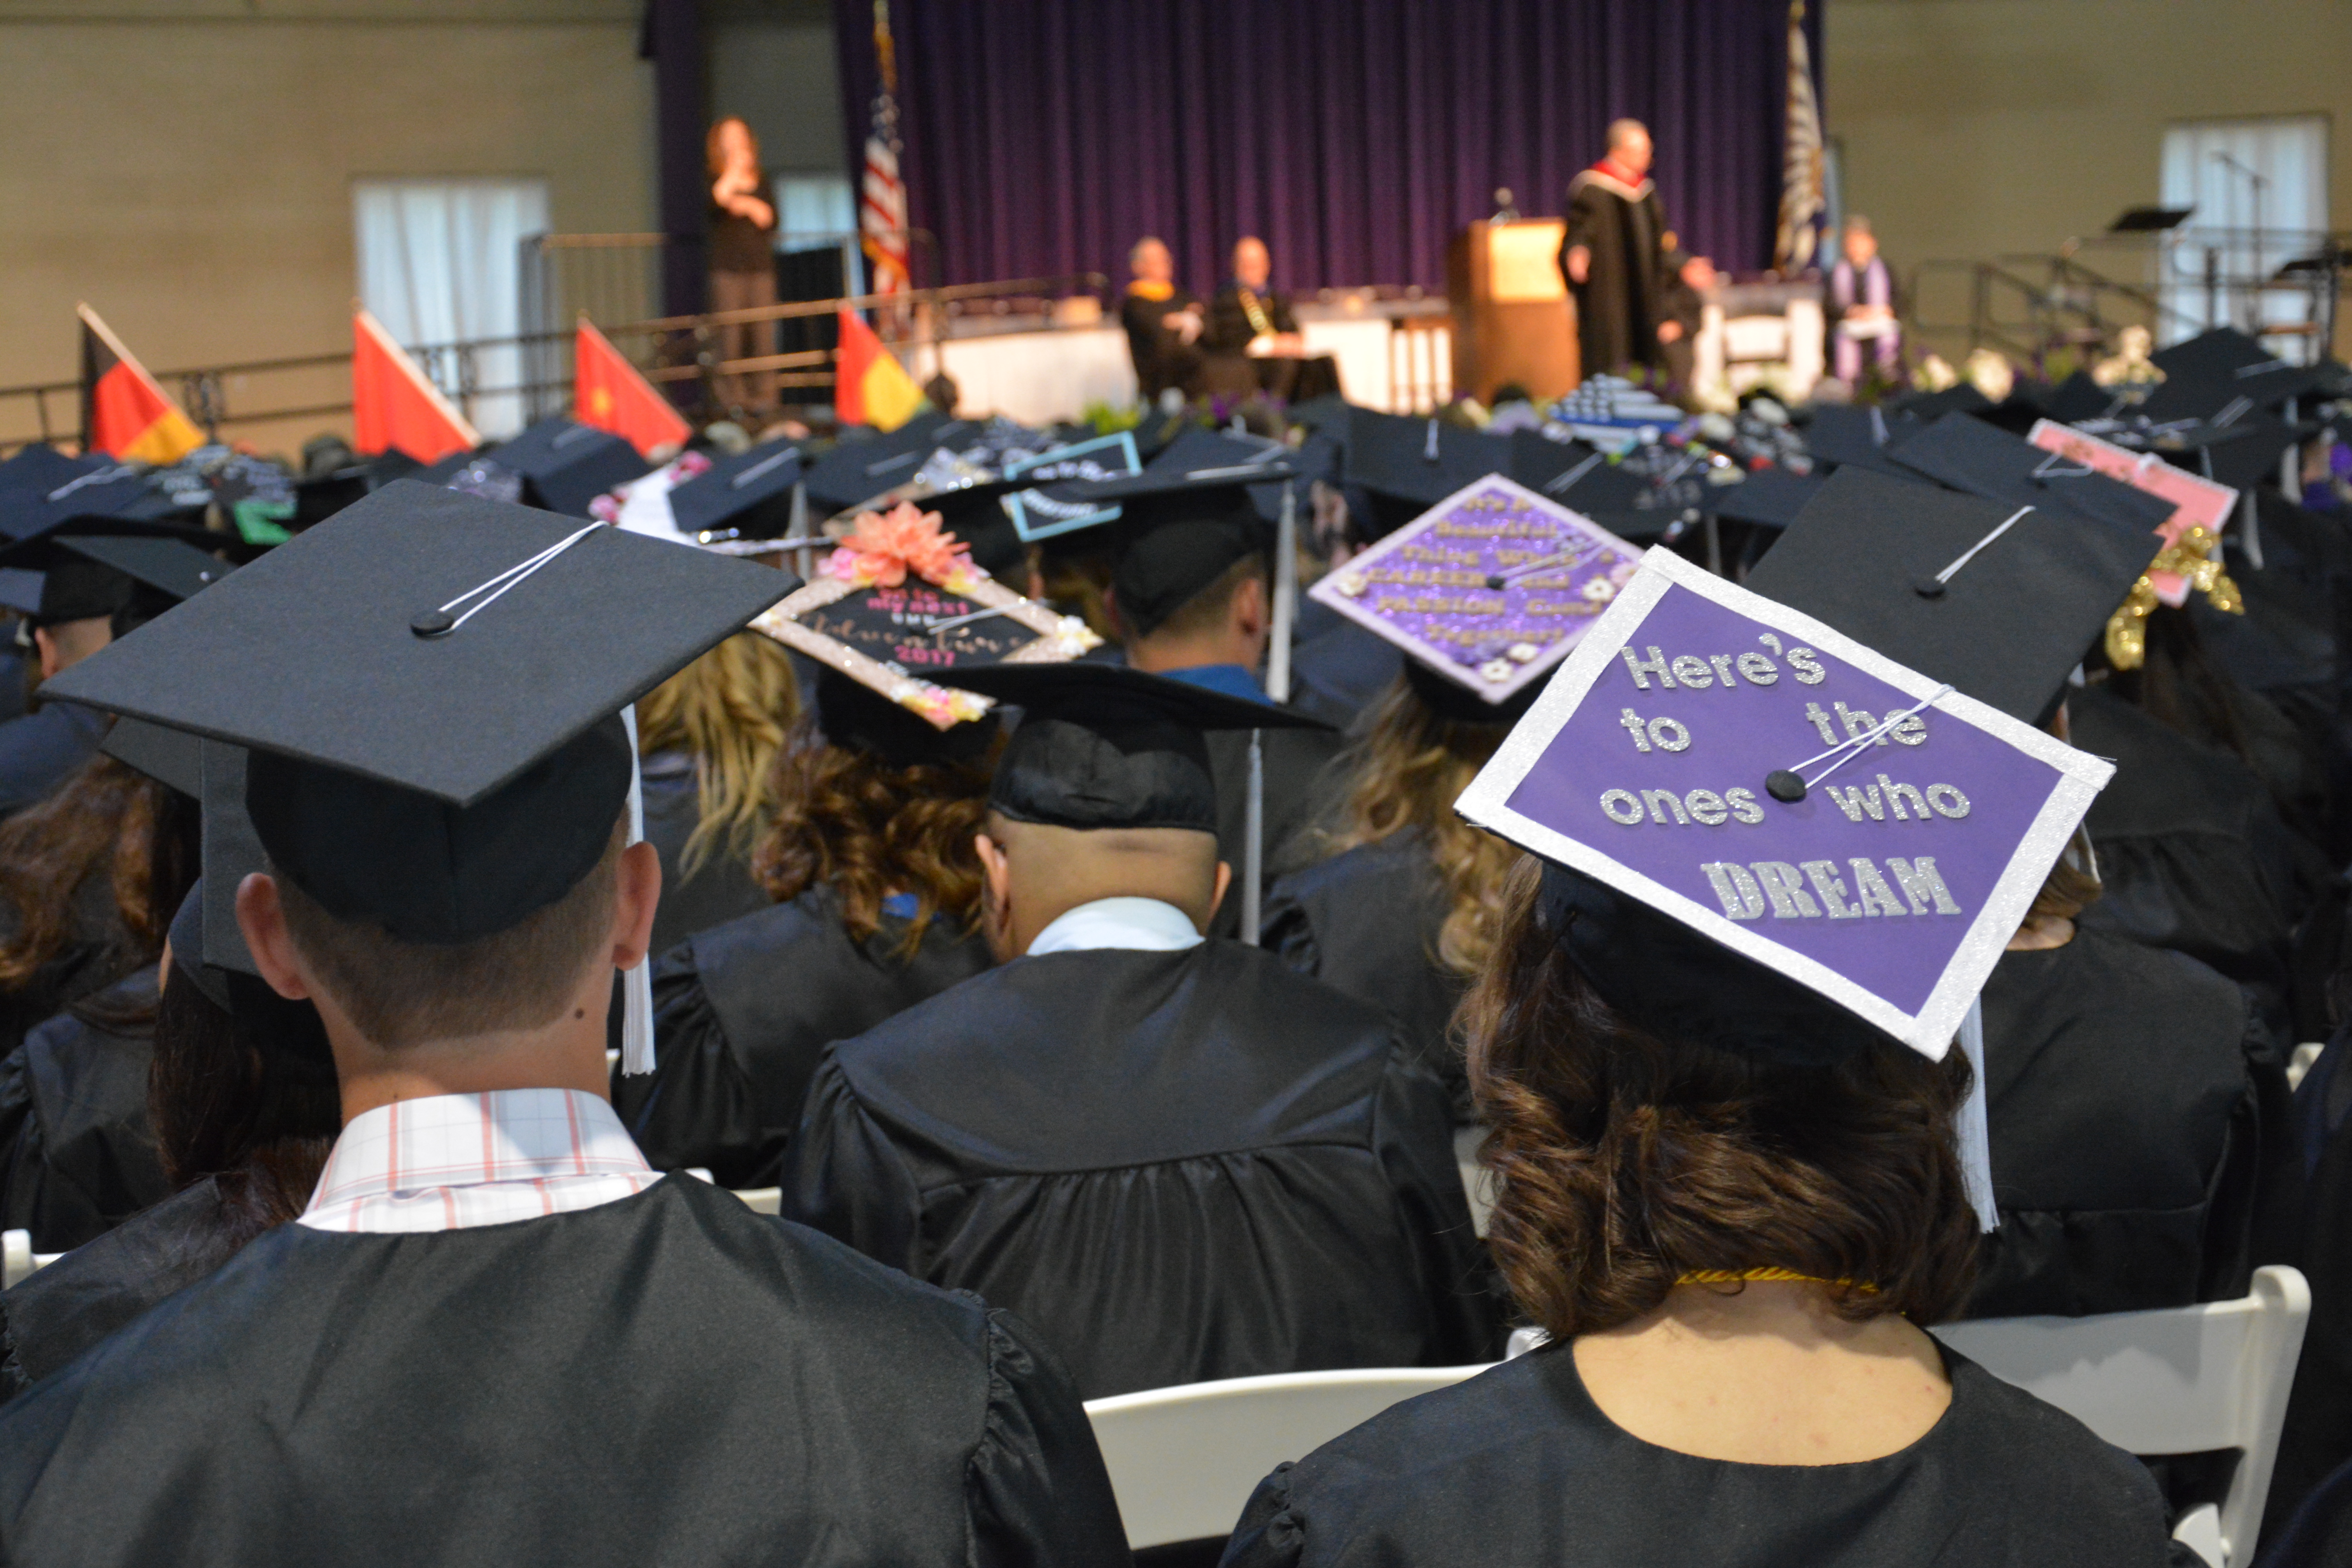 University of Mount Union students in cap and gown at Commencement ceremony 